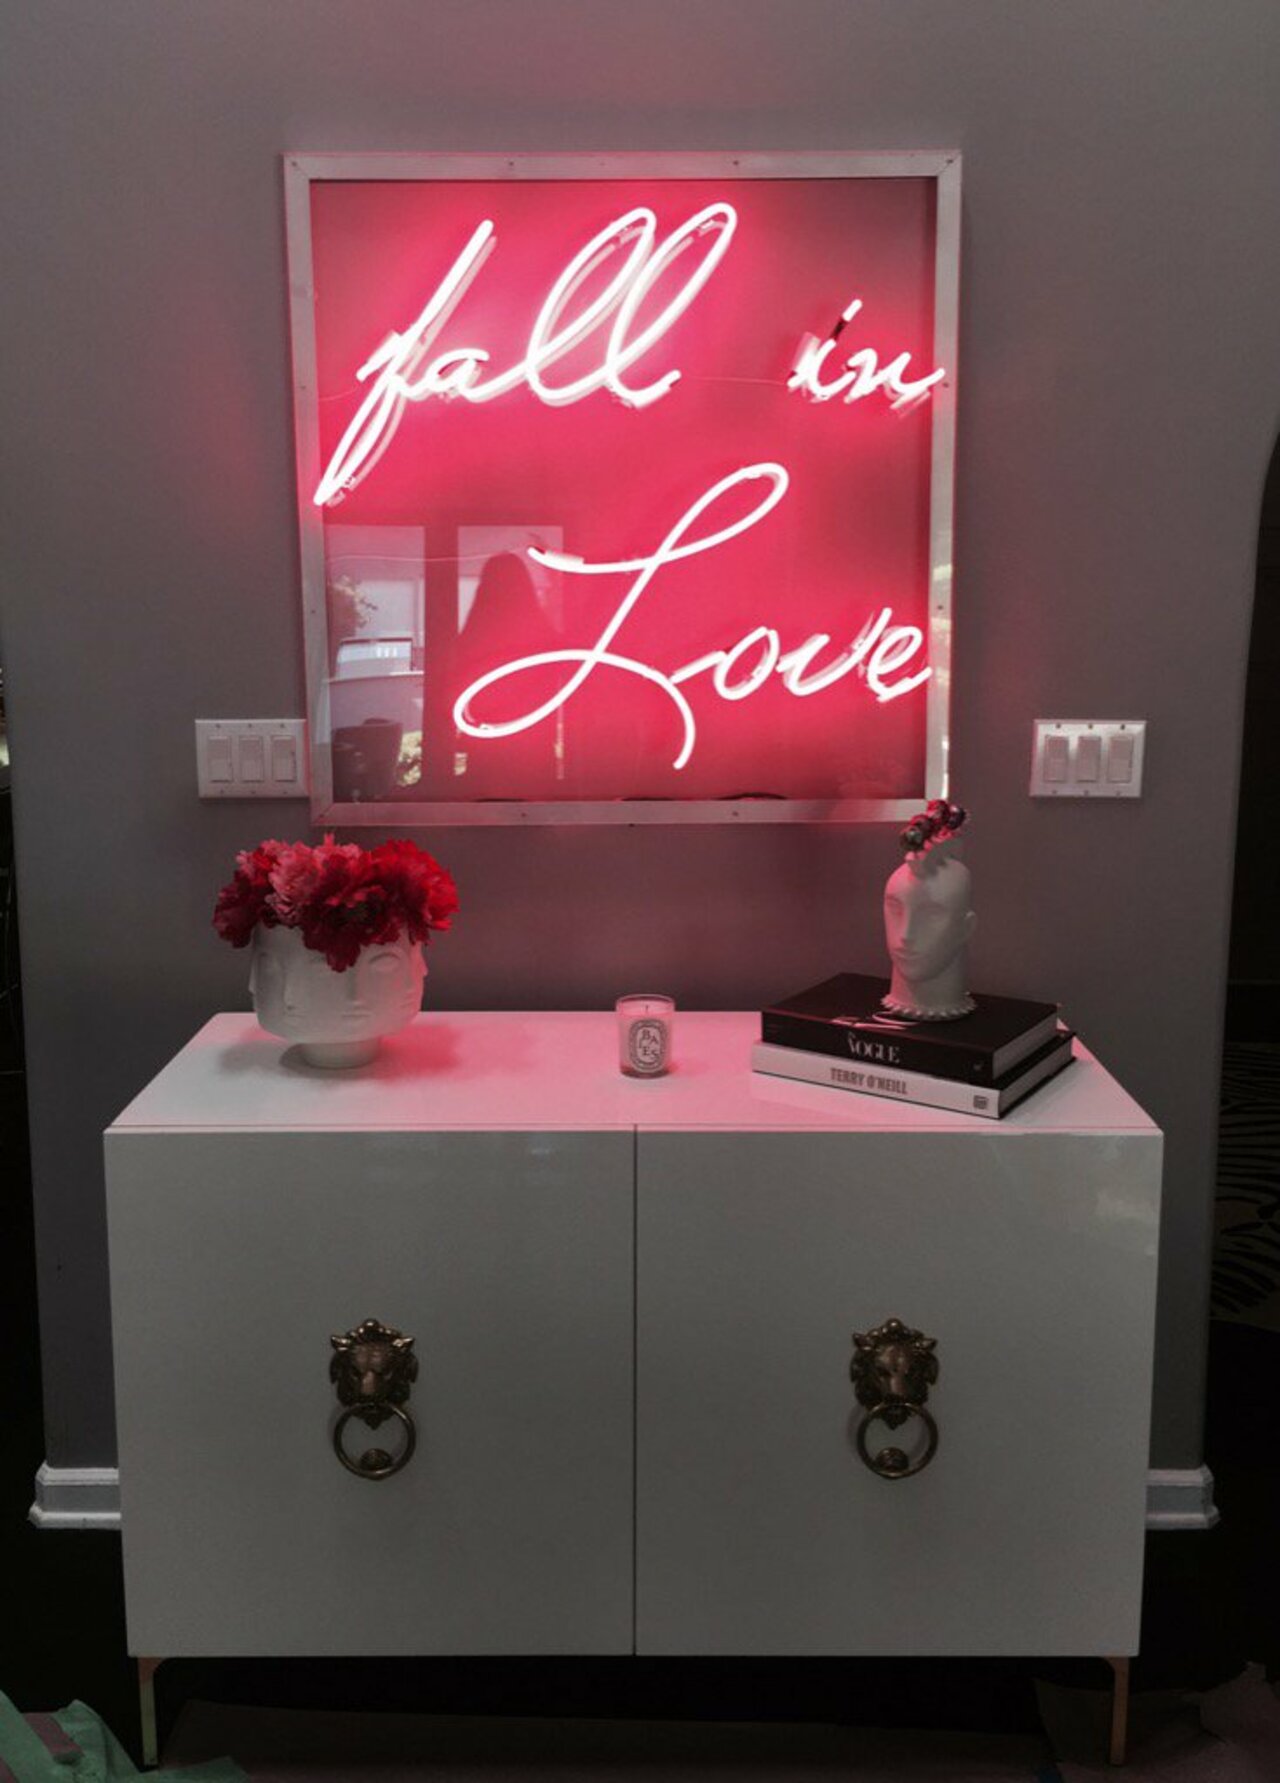 Just hung my new neon installation by @neonqueen and I'm LOVING it. #art #beauty #love #pink https://t.co/3UudqZY4q5